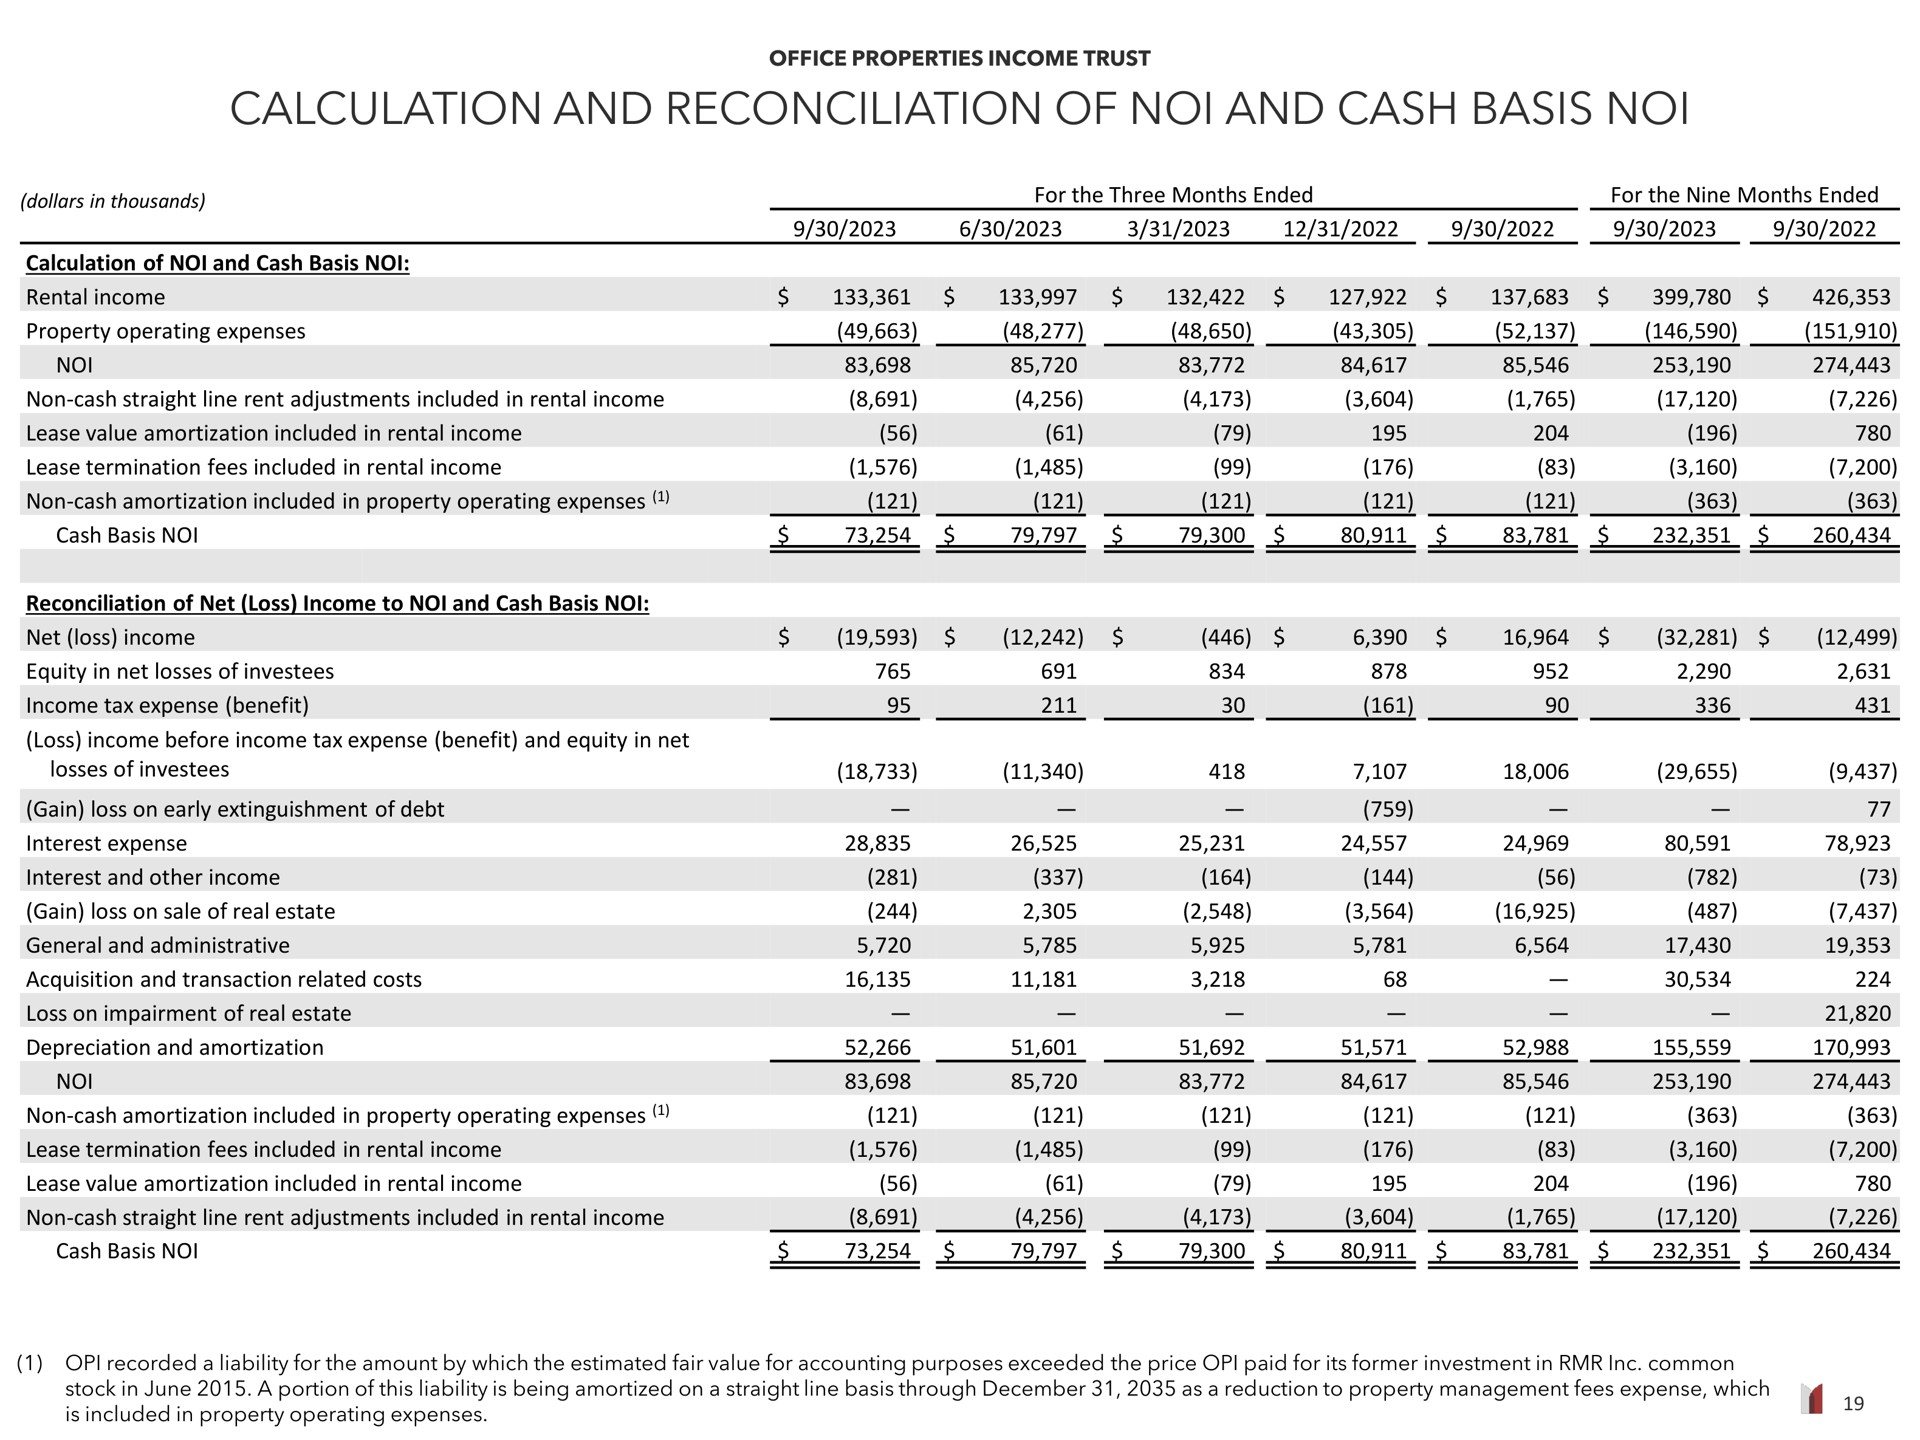 calculation and reconciliation of and cash basis a | Office Properties Income Trust